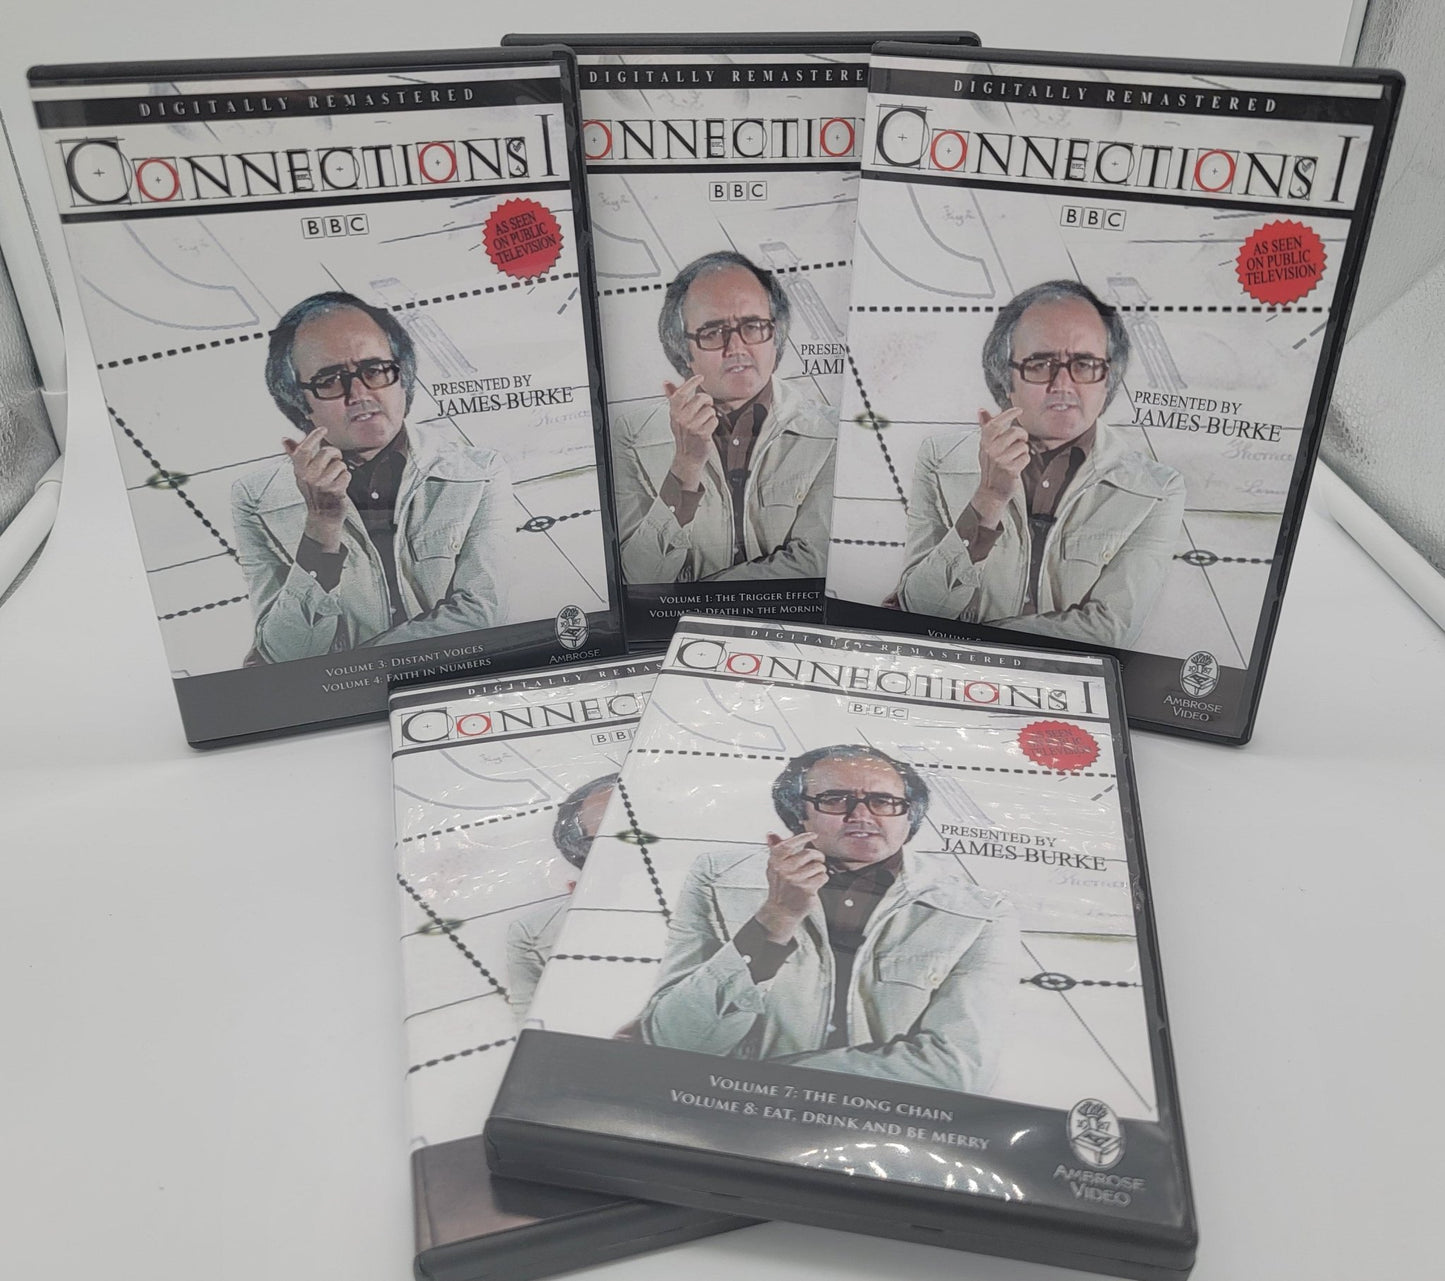 Ambrose DVD - Connections BBC Volume 1 & 10 Volume Set | History Channel - Digitally Remastered - DVD - Steady Bunny Shop